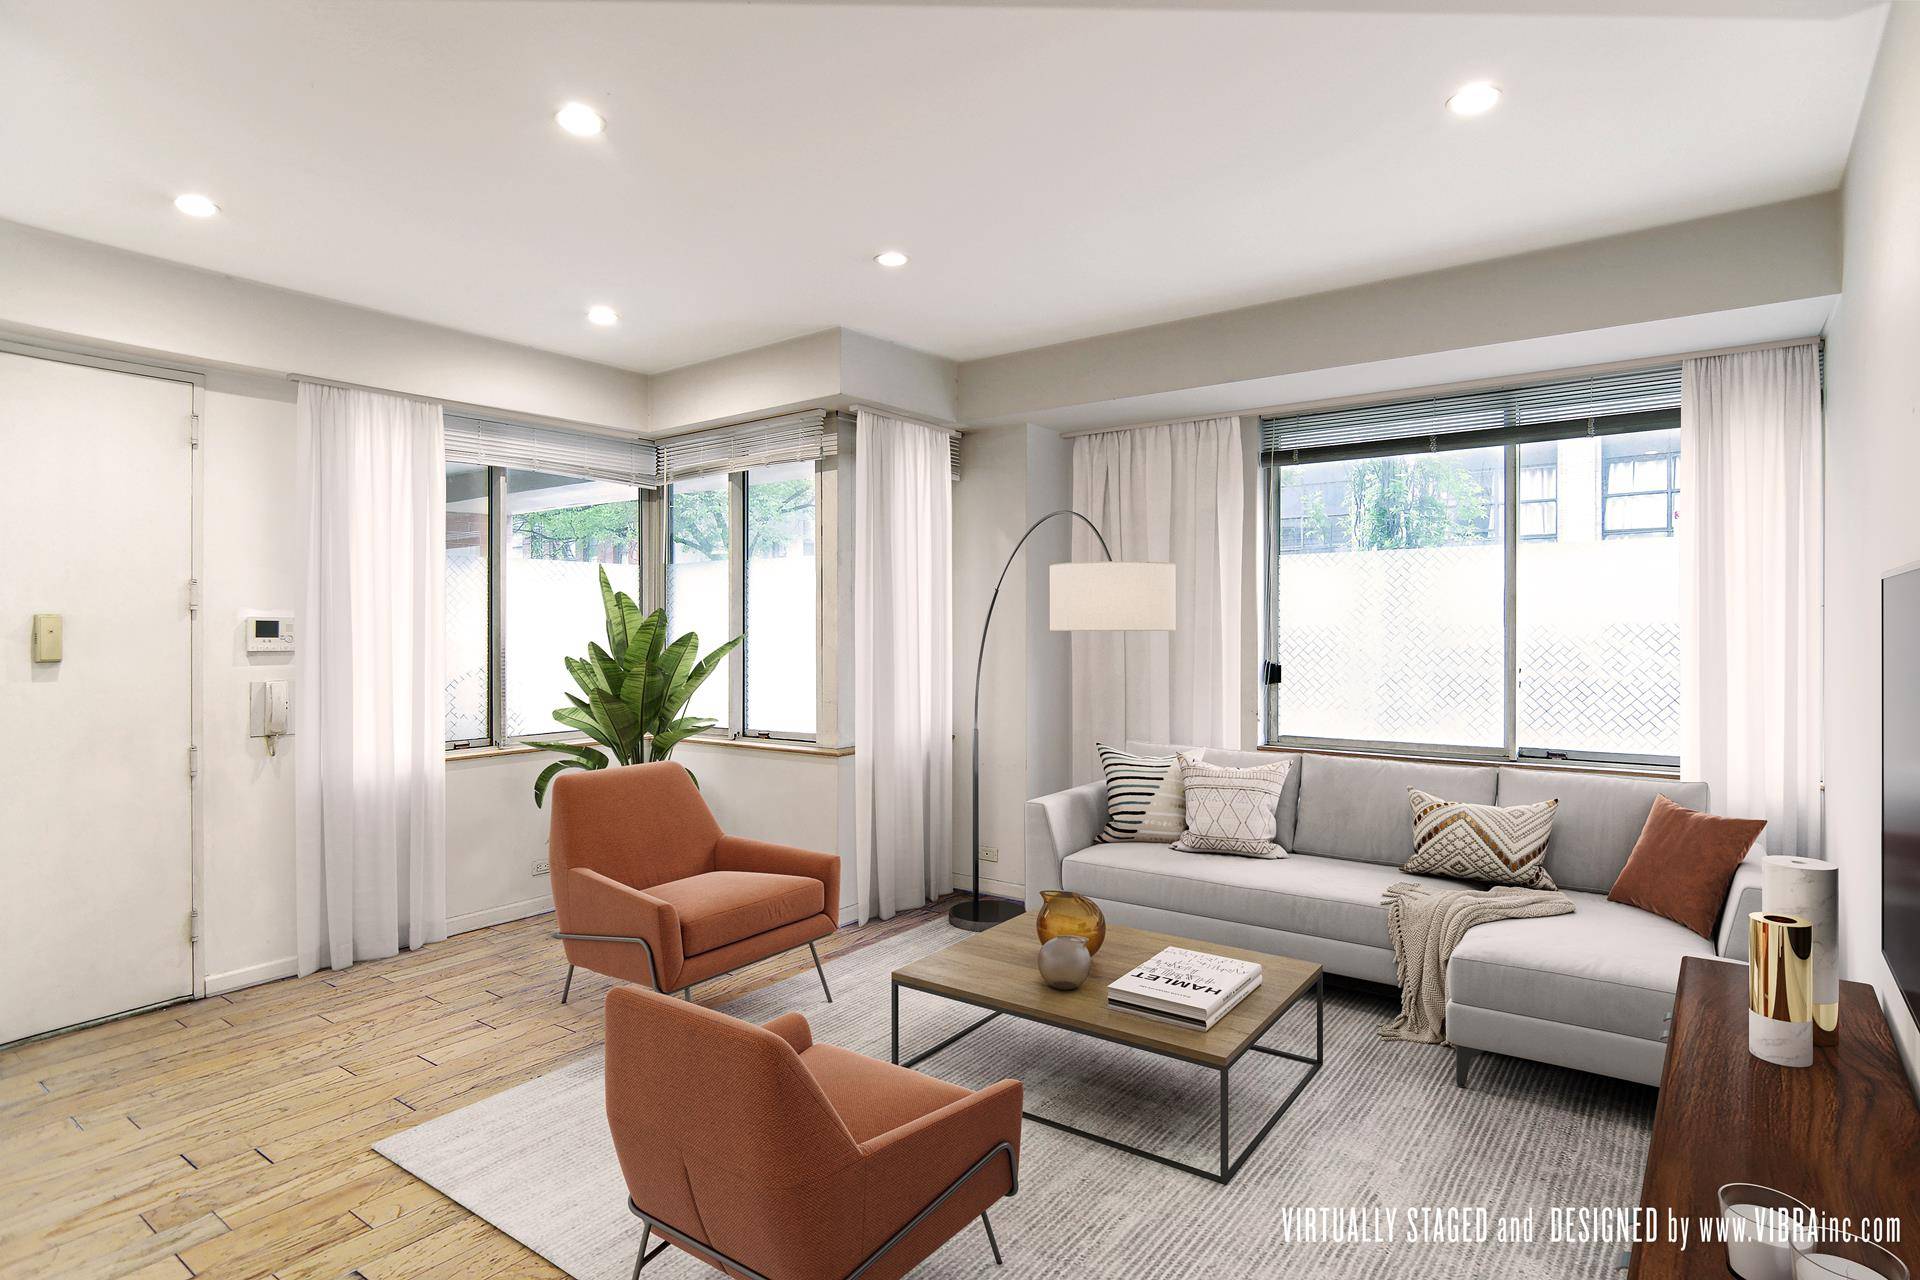 You are not dreaming ! You can actually have it all the exclusivity of your own Townhouse style condo, along with the complete services of a luxury condominium.